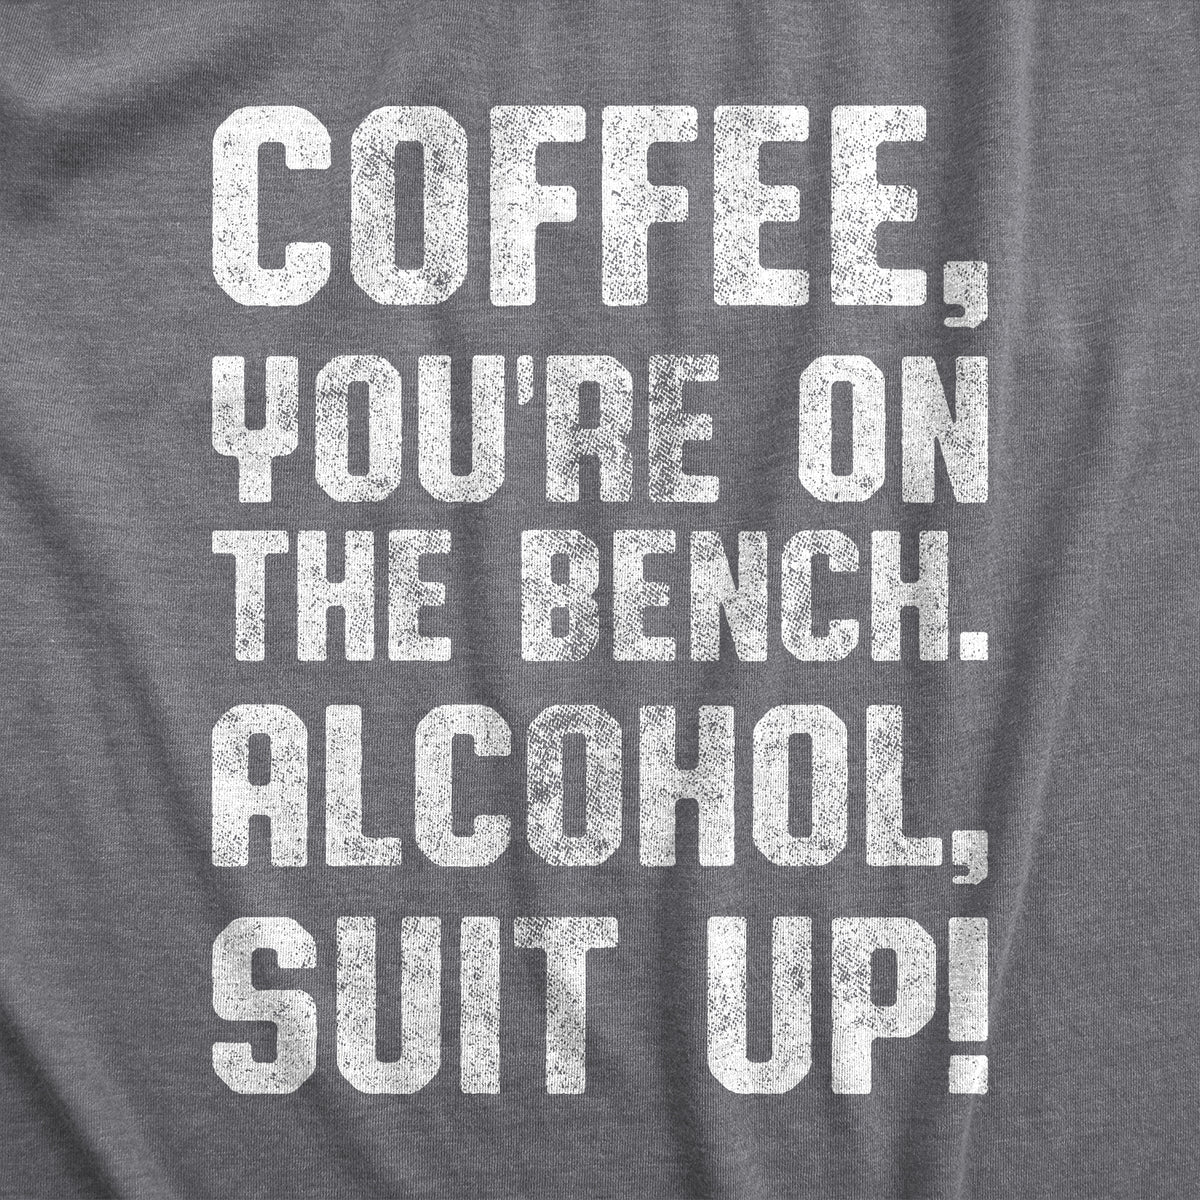 Coffee, You&#39;re On The Bench Women&#39;s T Shirt